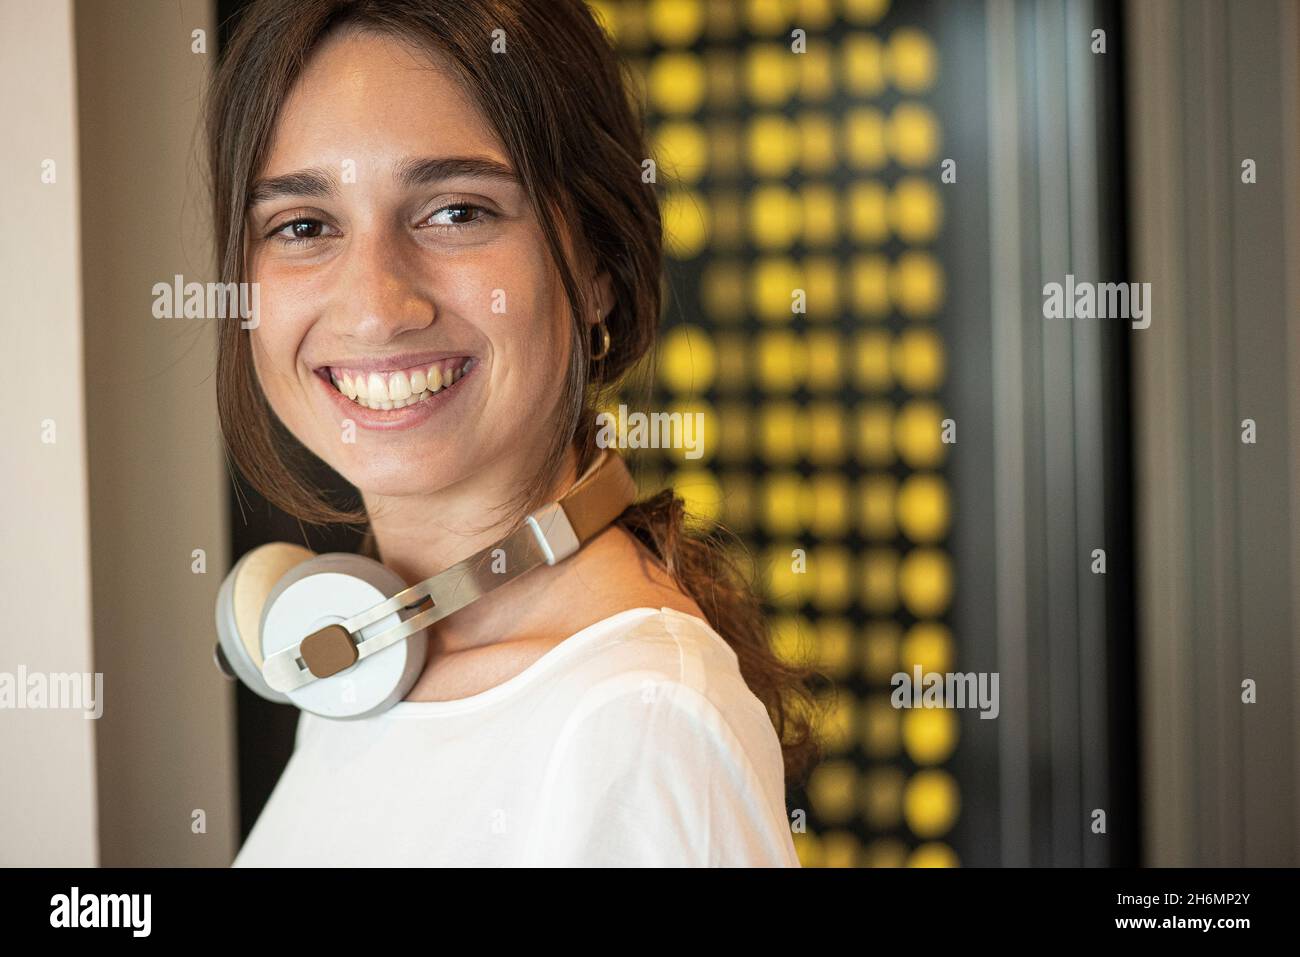 Portrait of smiling young woman in office Stock Photo